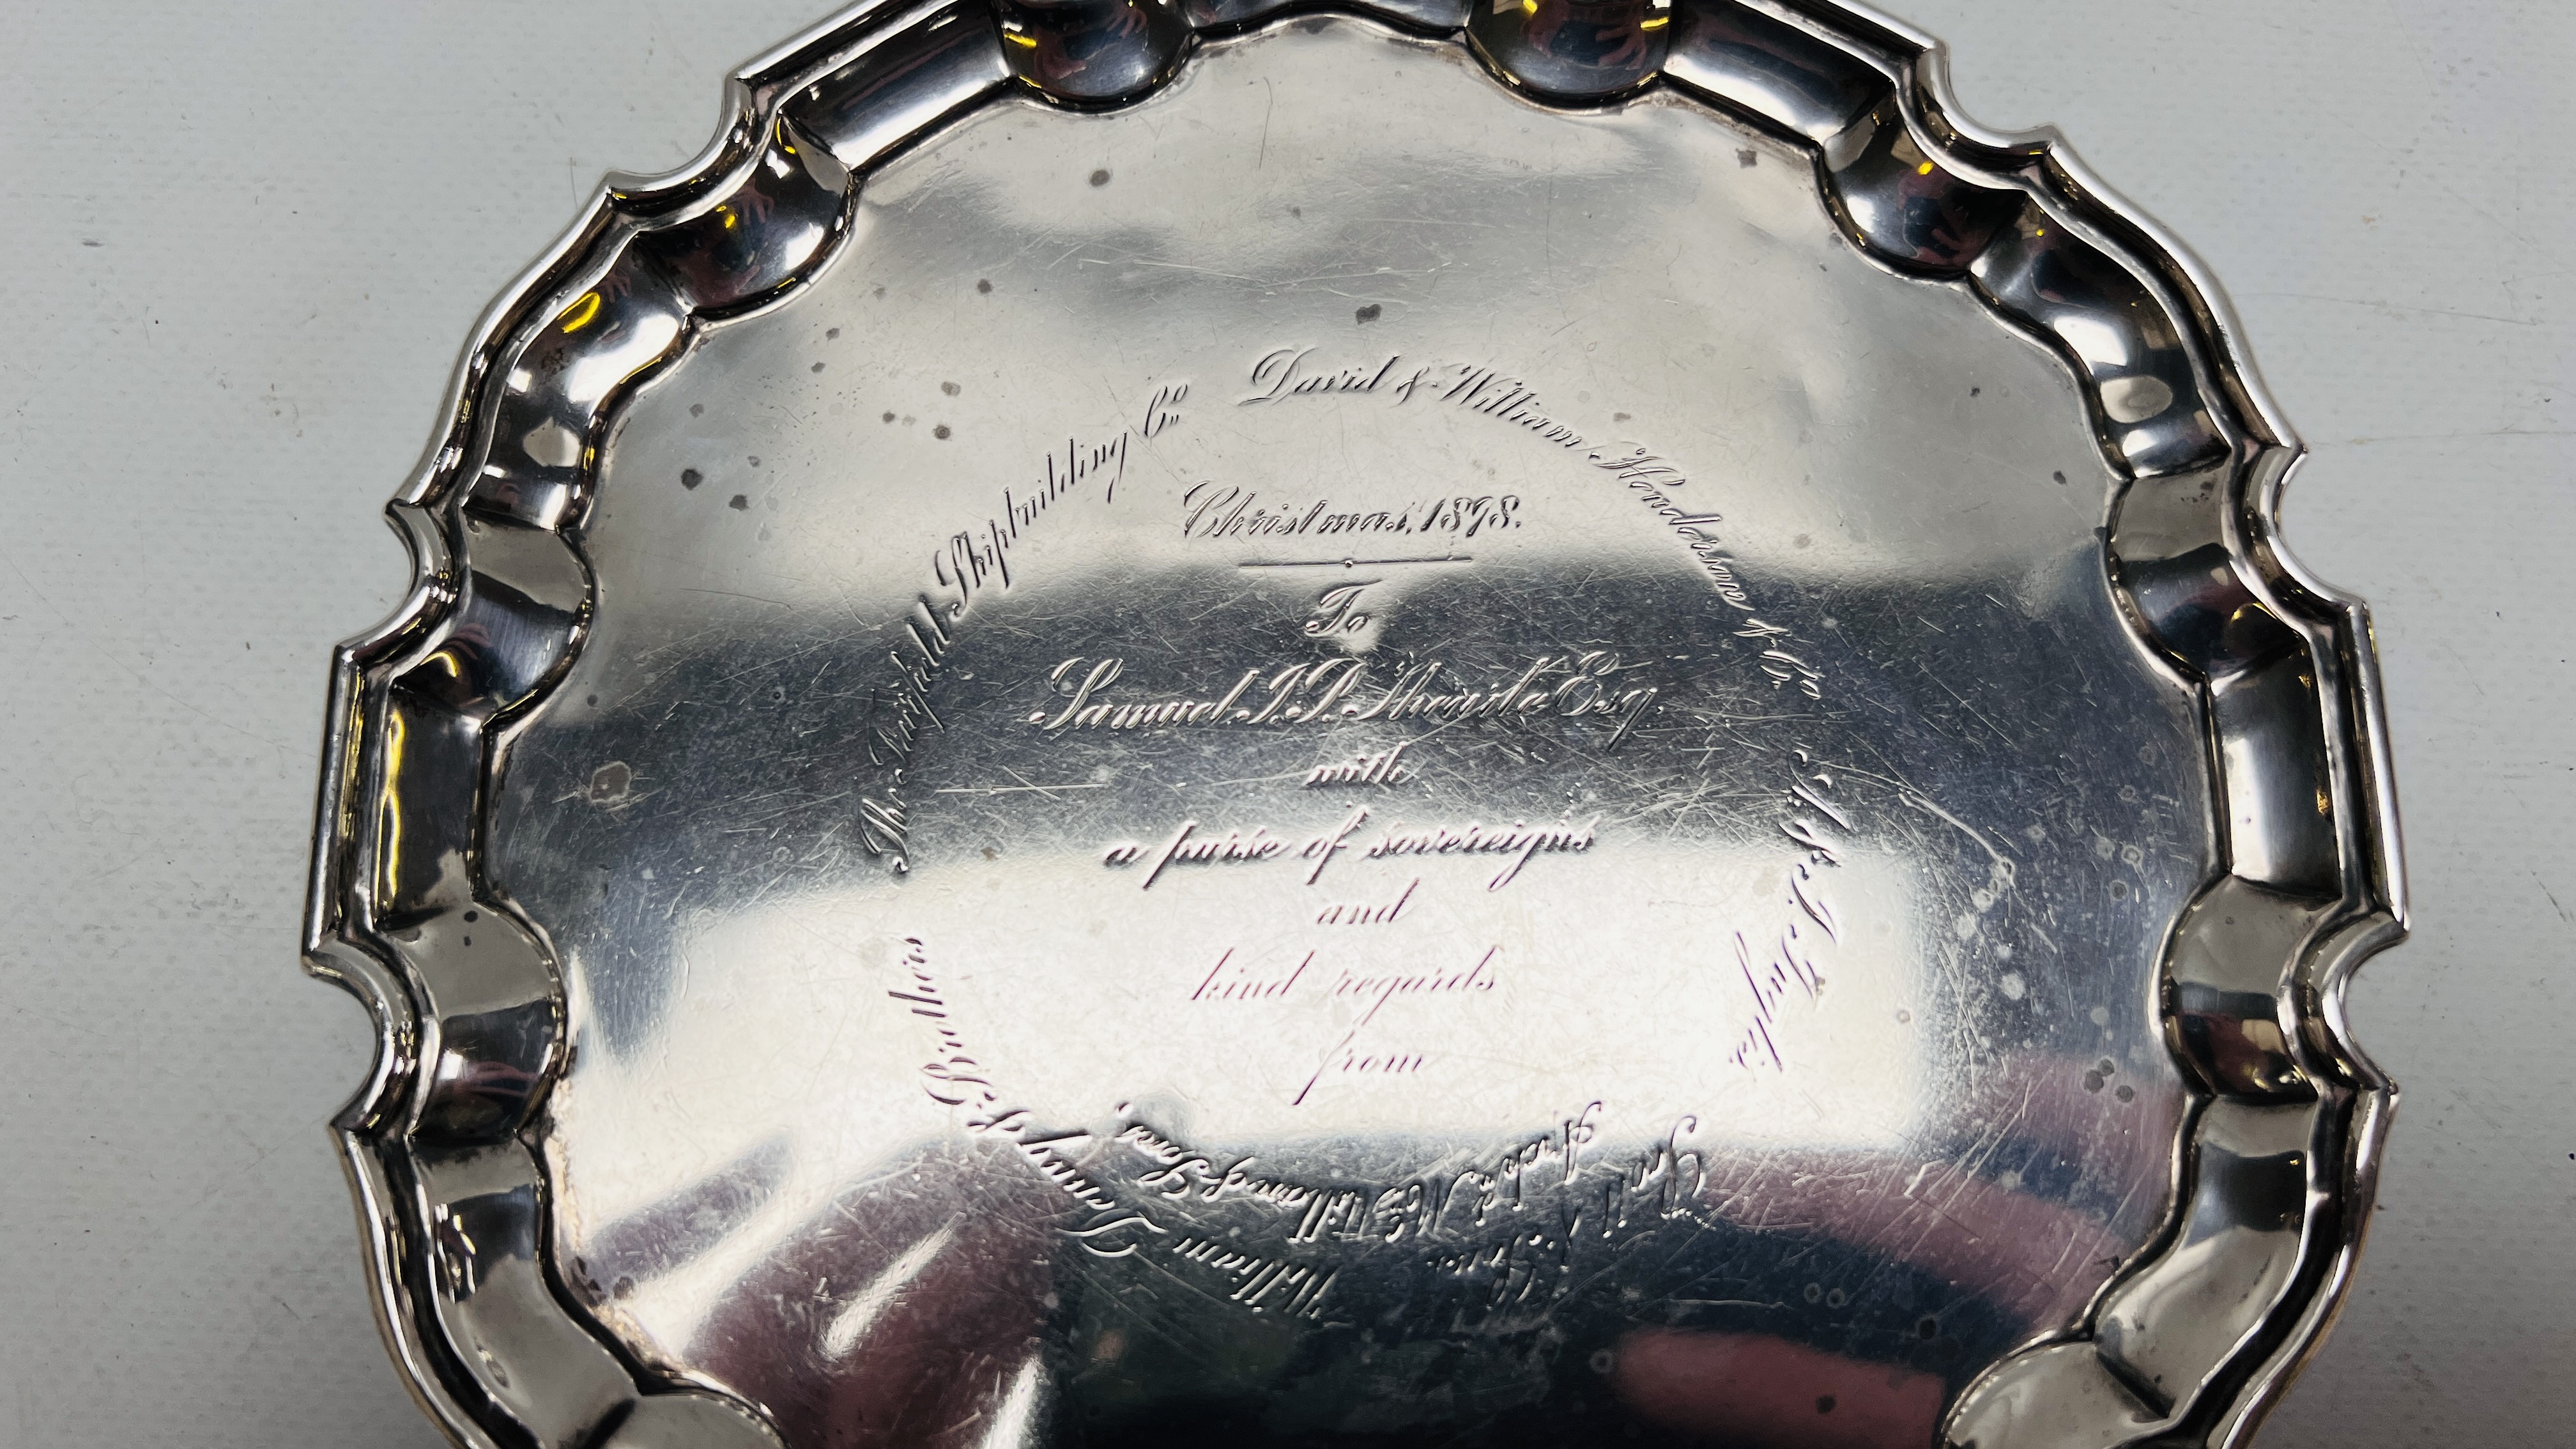 AN ANTIQUE SILVER SALVER GIFTED TO SAMUEL JAMES POPE THEARLE CHRISTMAS 1898, INSCRIBED. - Image 2 of 10